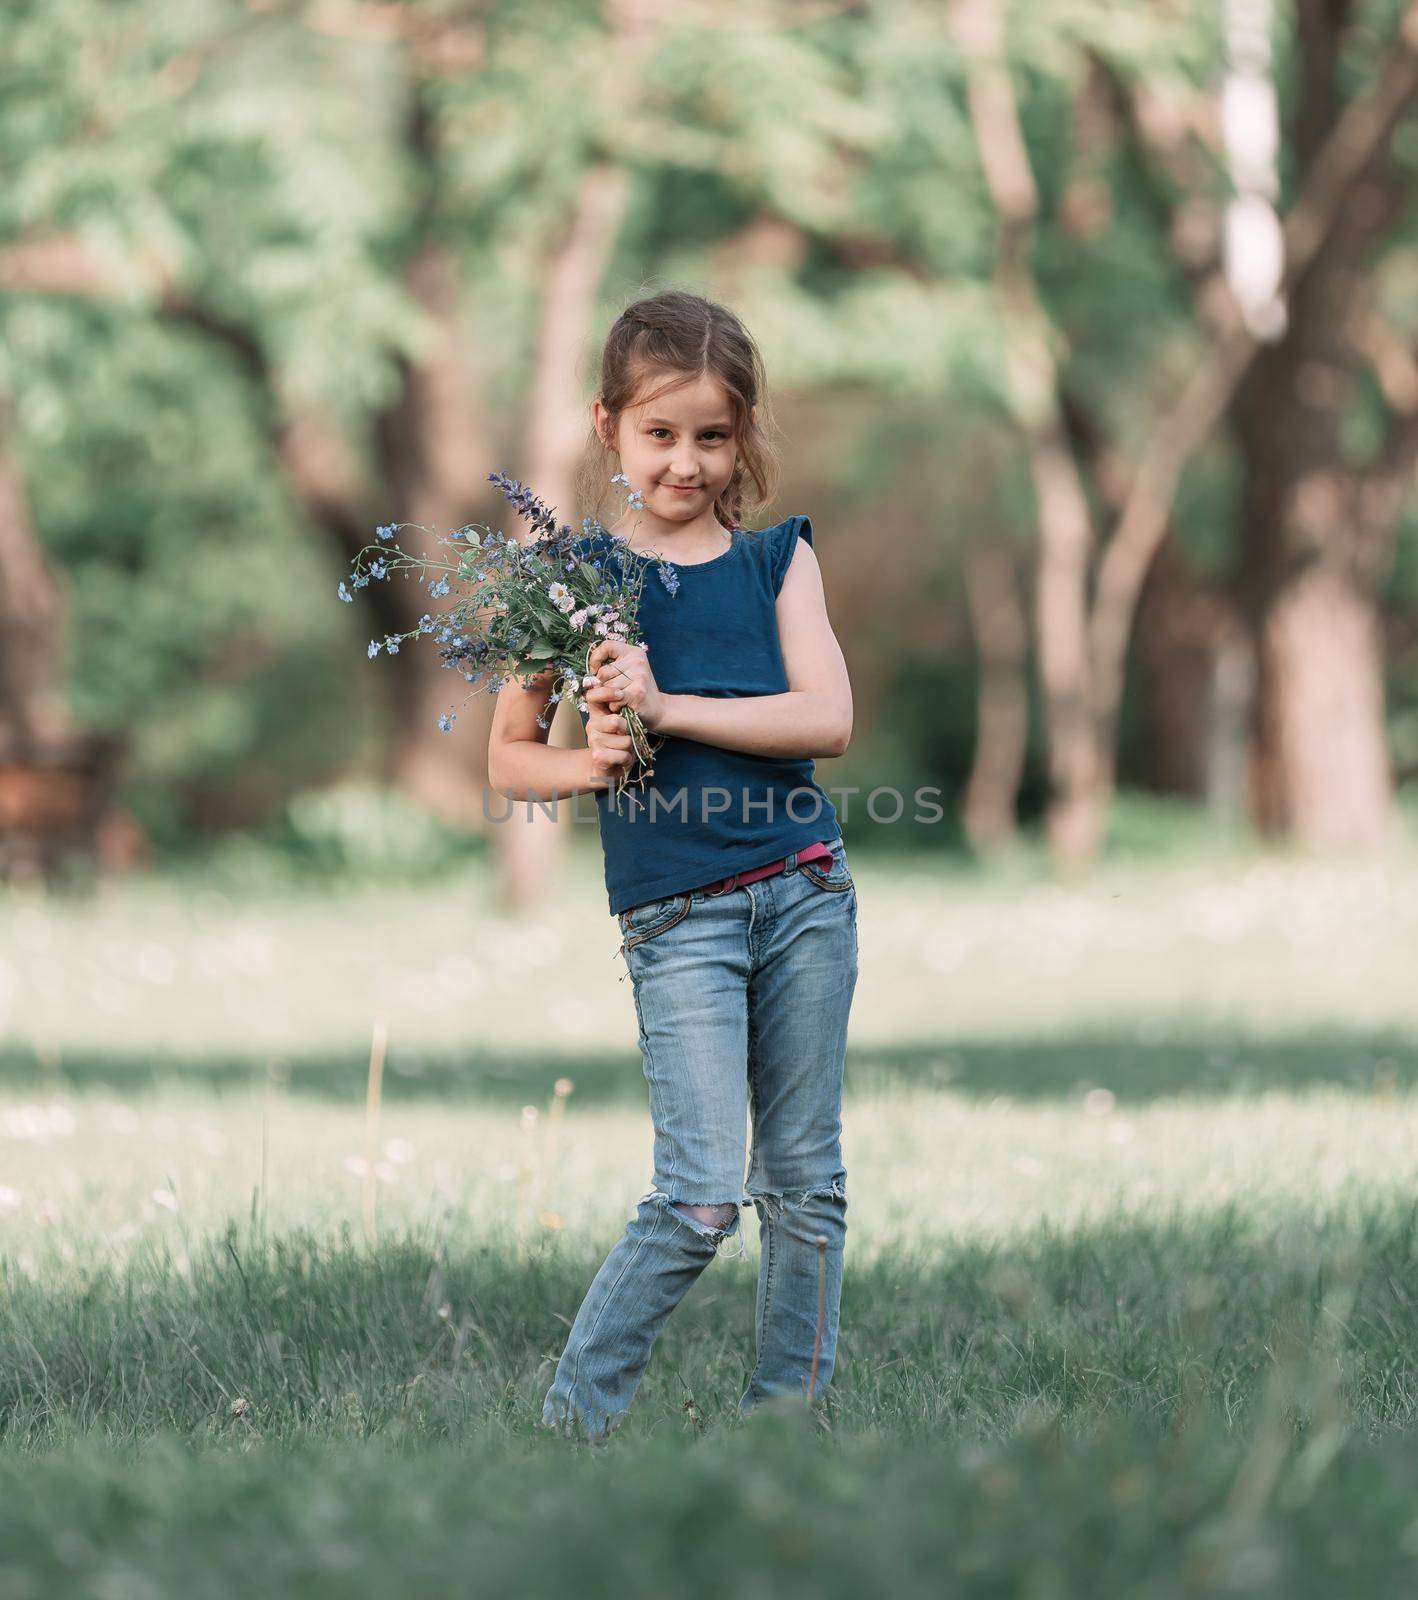 little boy takes a picture of his sister in the Park. Hobbies and interests